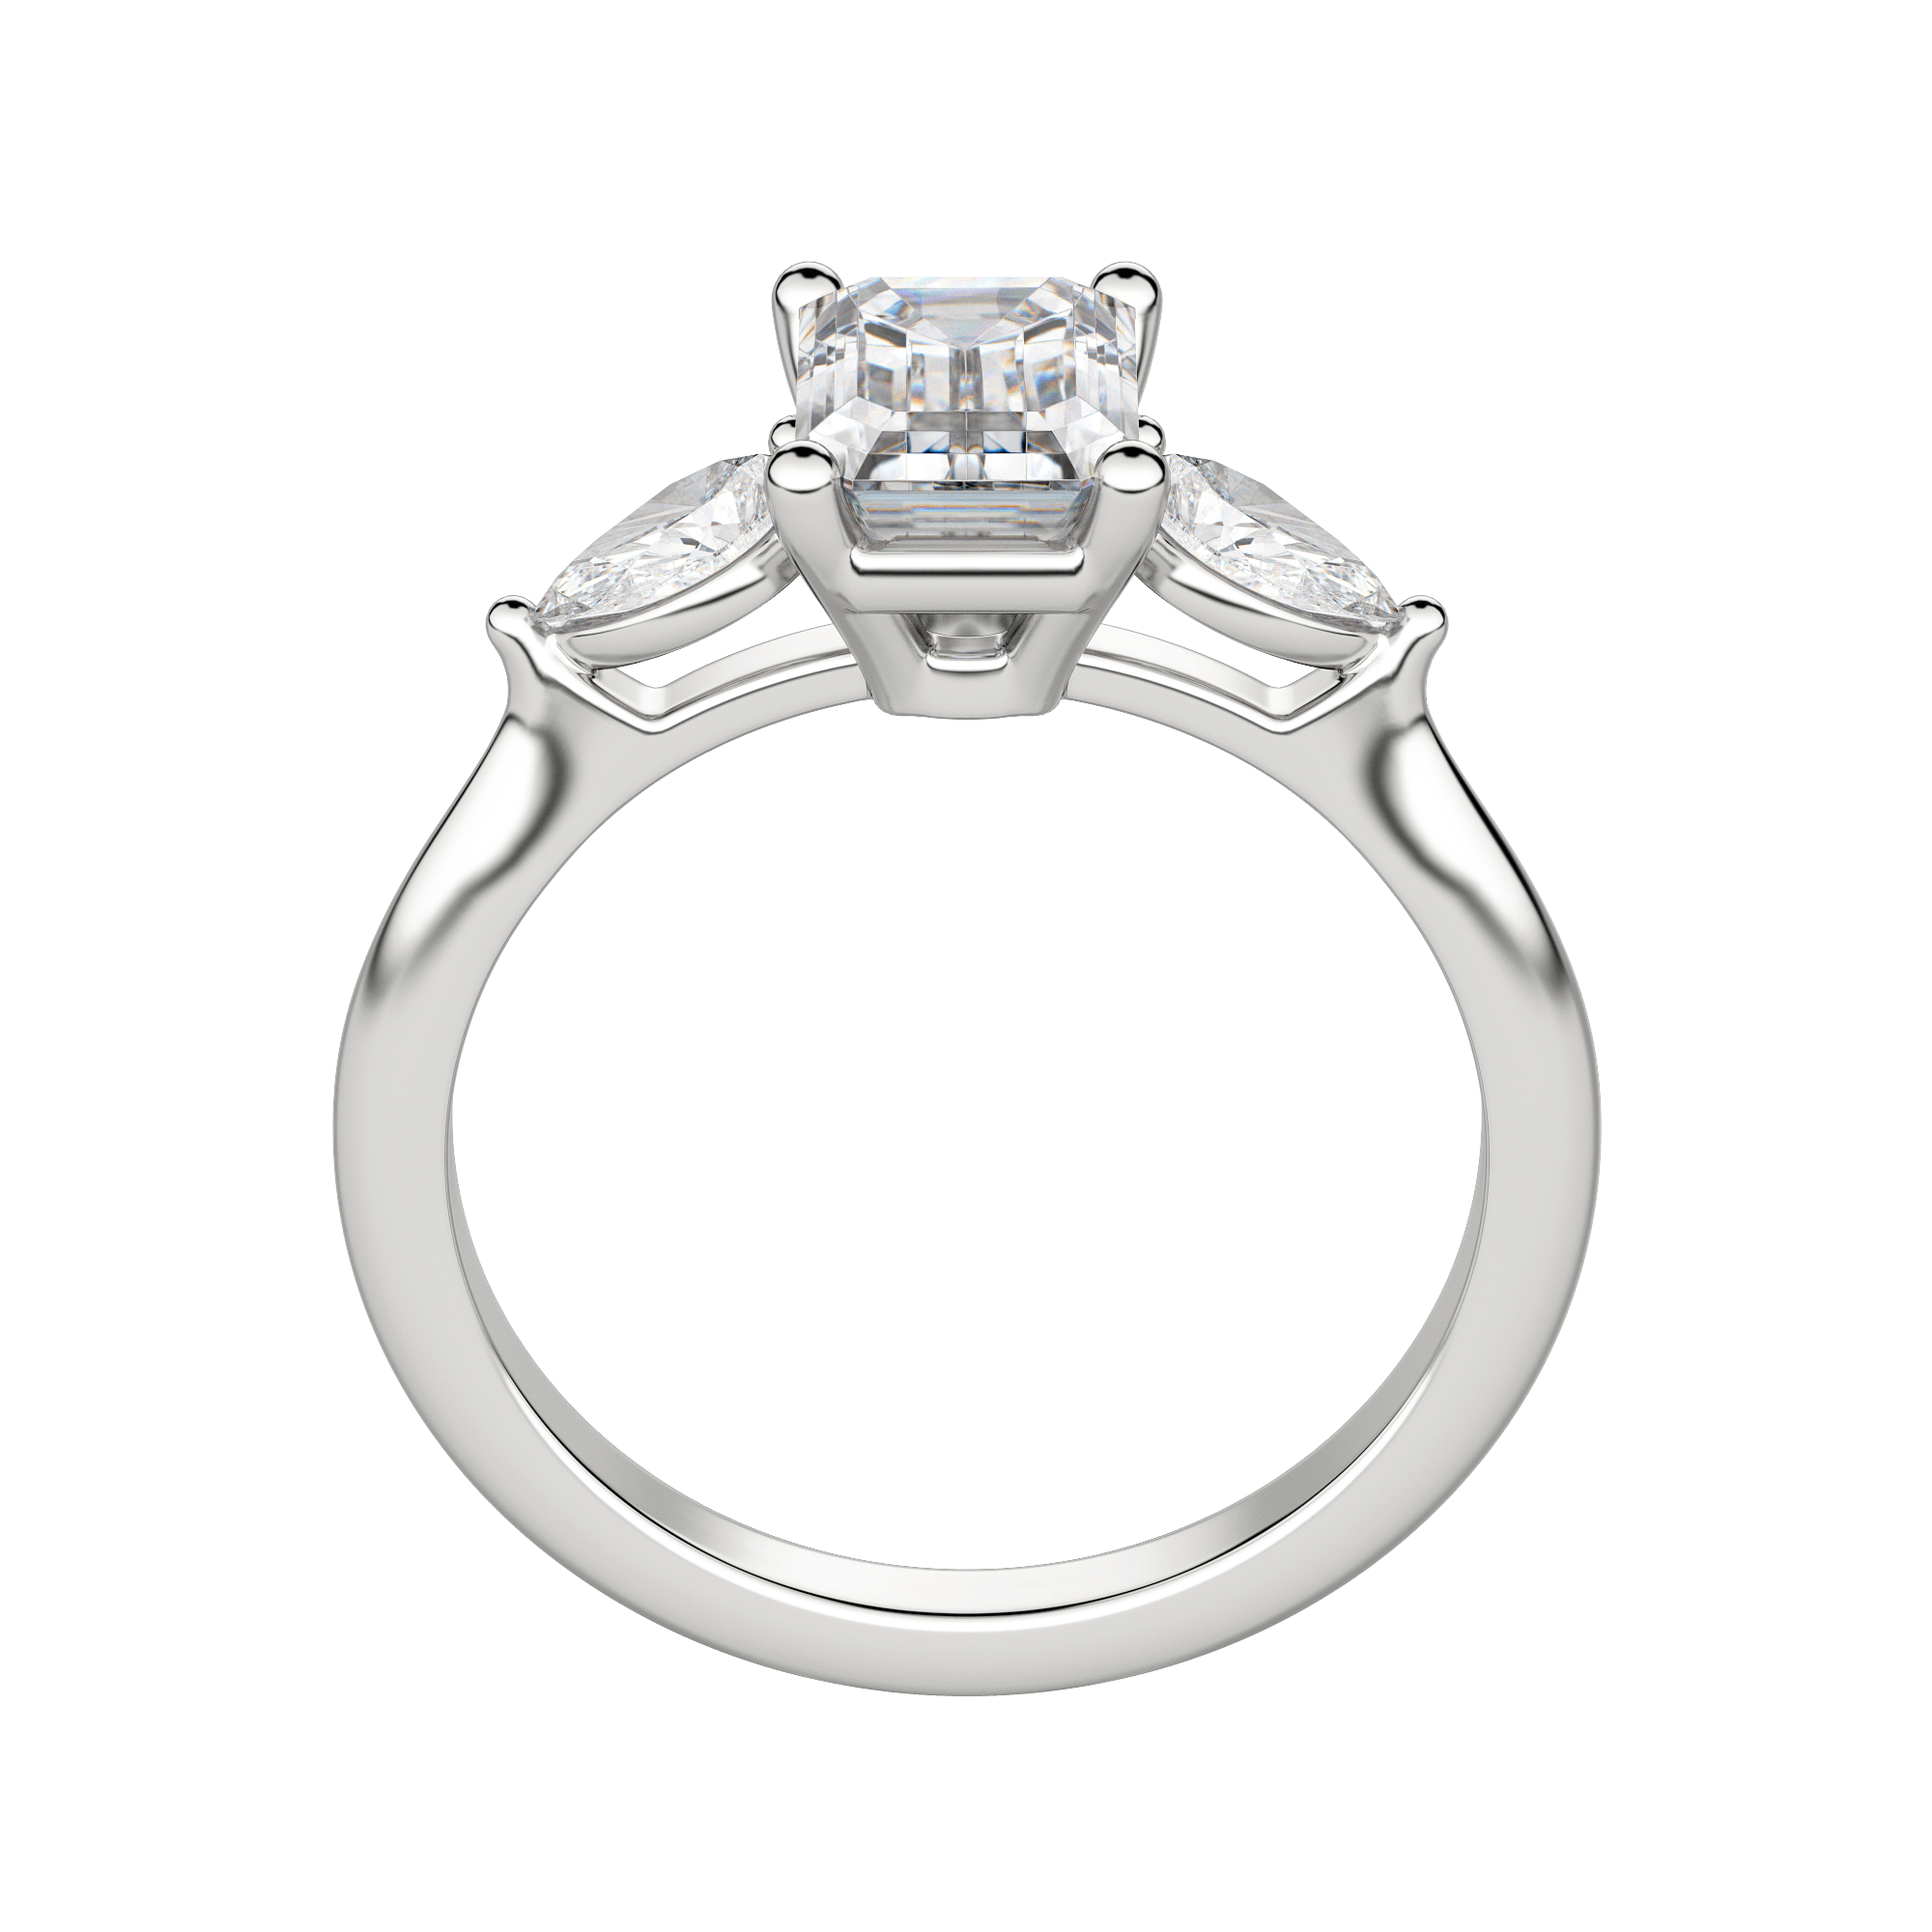 Lily Classic Emerald Cut Engagement Ring, Hover, Platinum, 18K White Gold, 